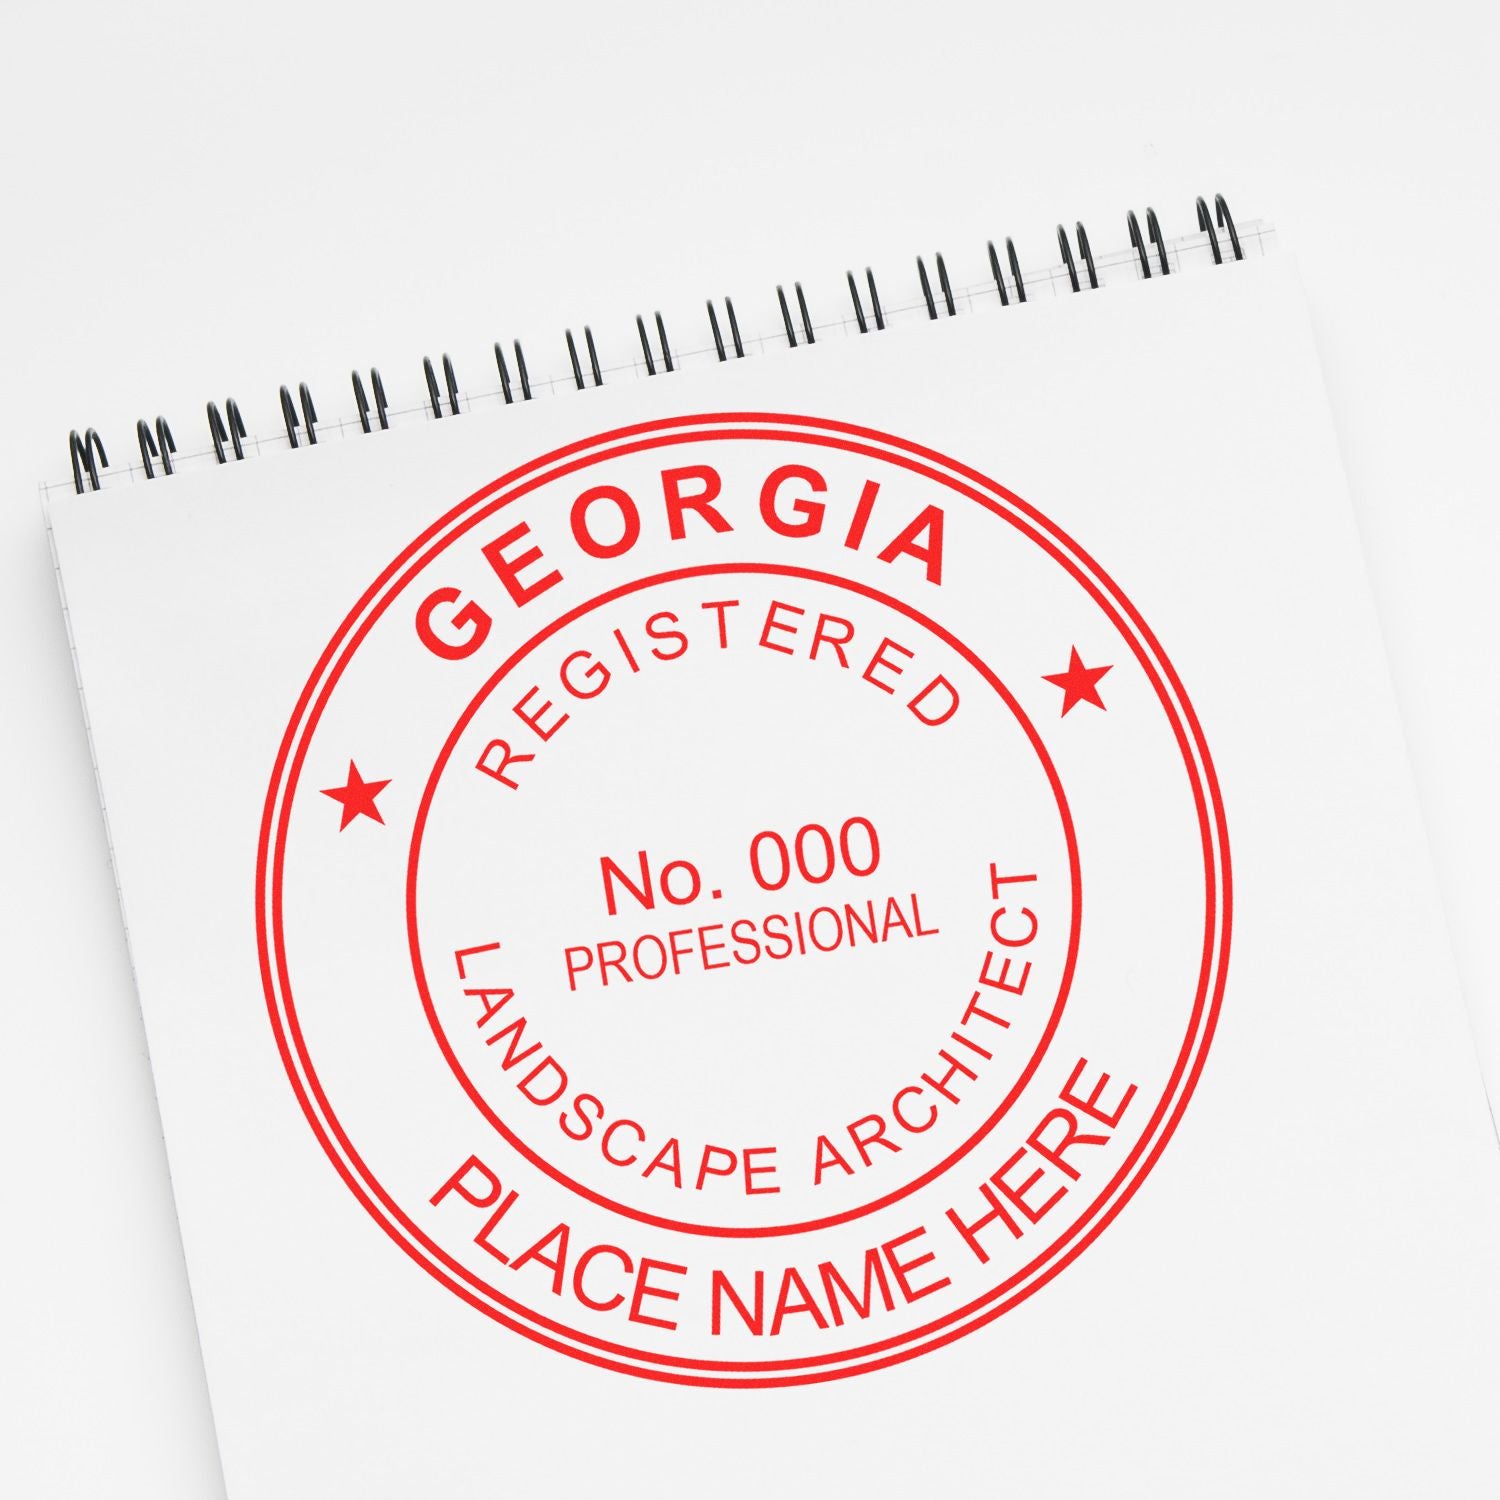 A stamped impression of the Self-Inking Georgia Landscape Architect Stamp in this stylish lifestyle photo, setting the tone for a unique and personalized product.